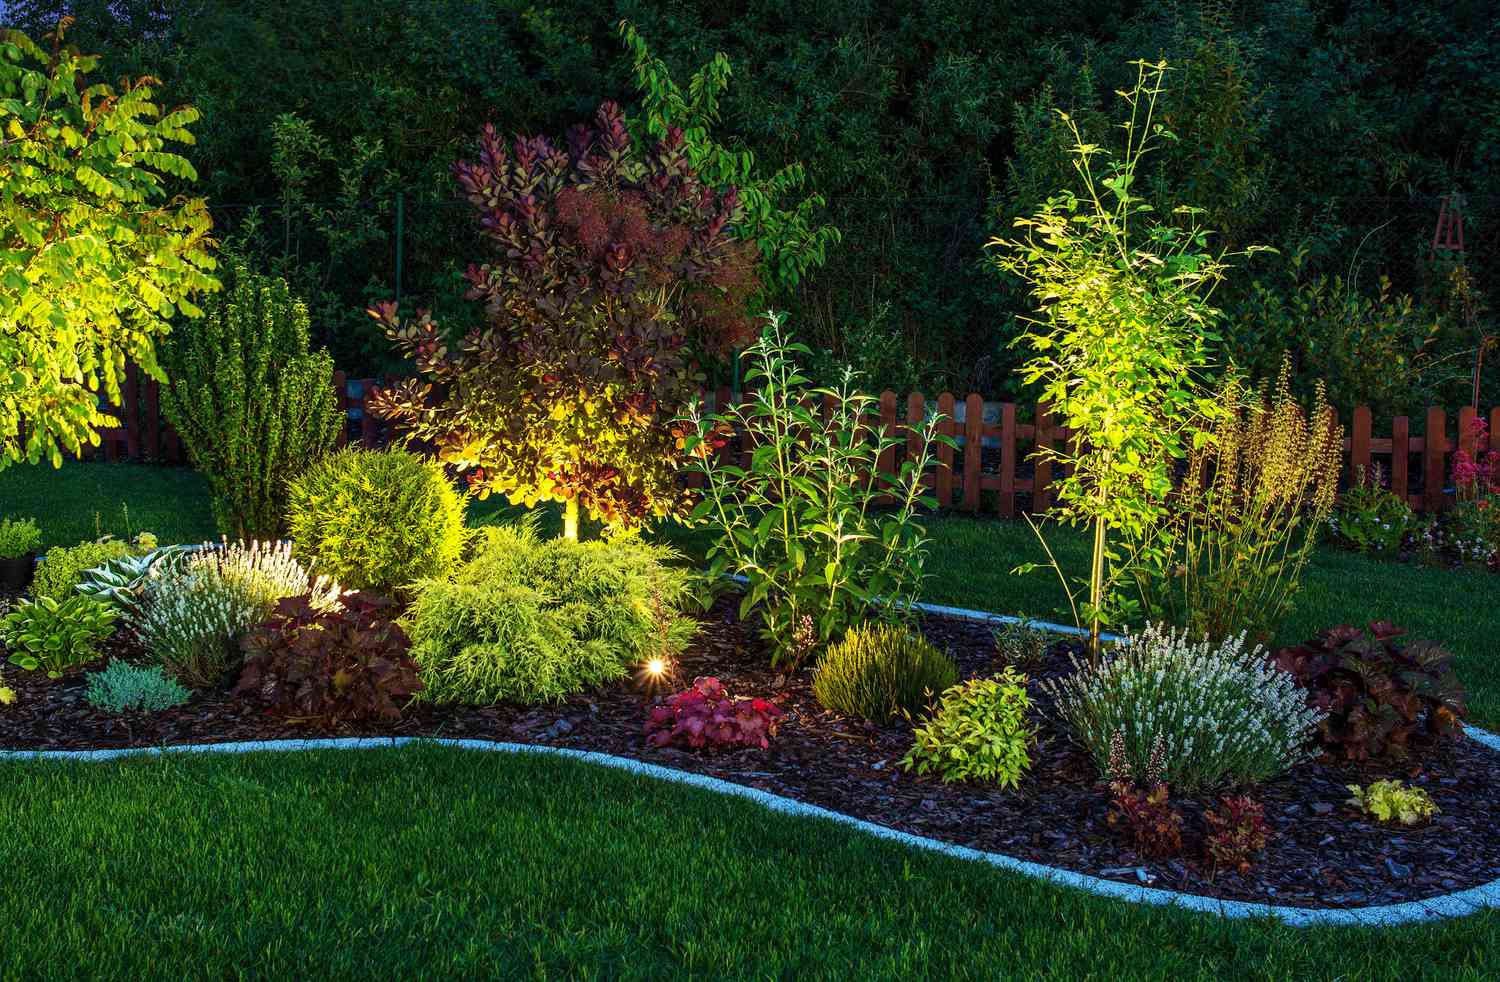 Love Your Landscaping: How Does Your Garden Glow?